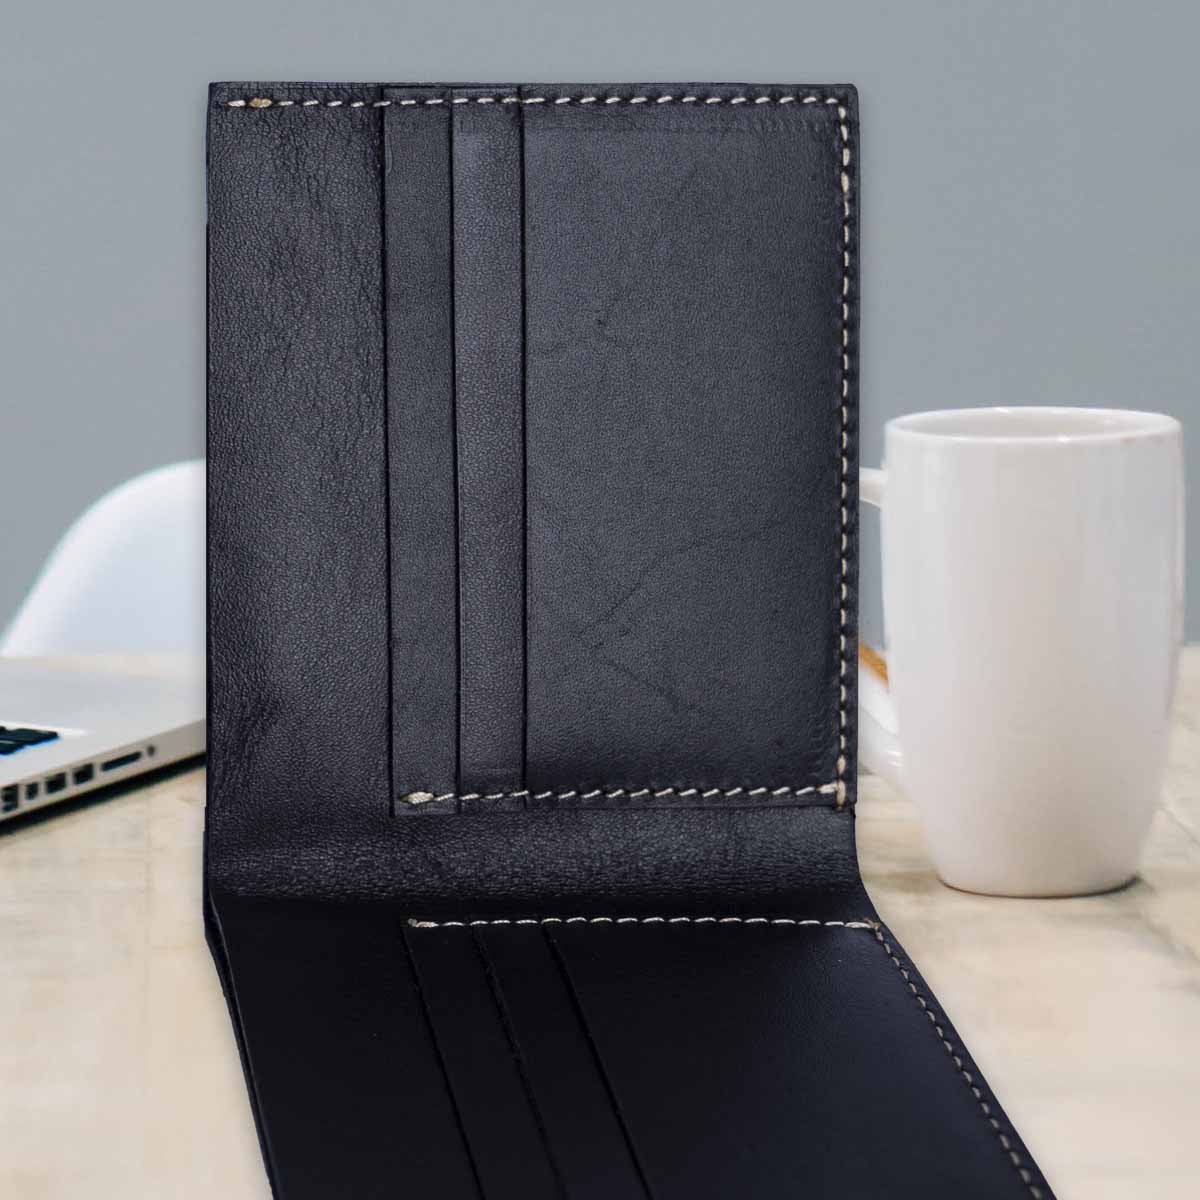 slim minimalist wallet, a gift for your brother and friend